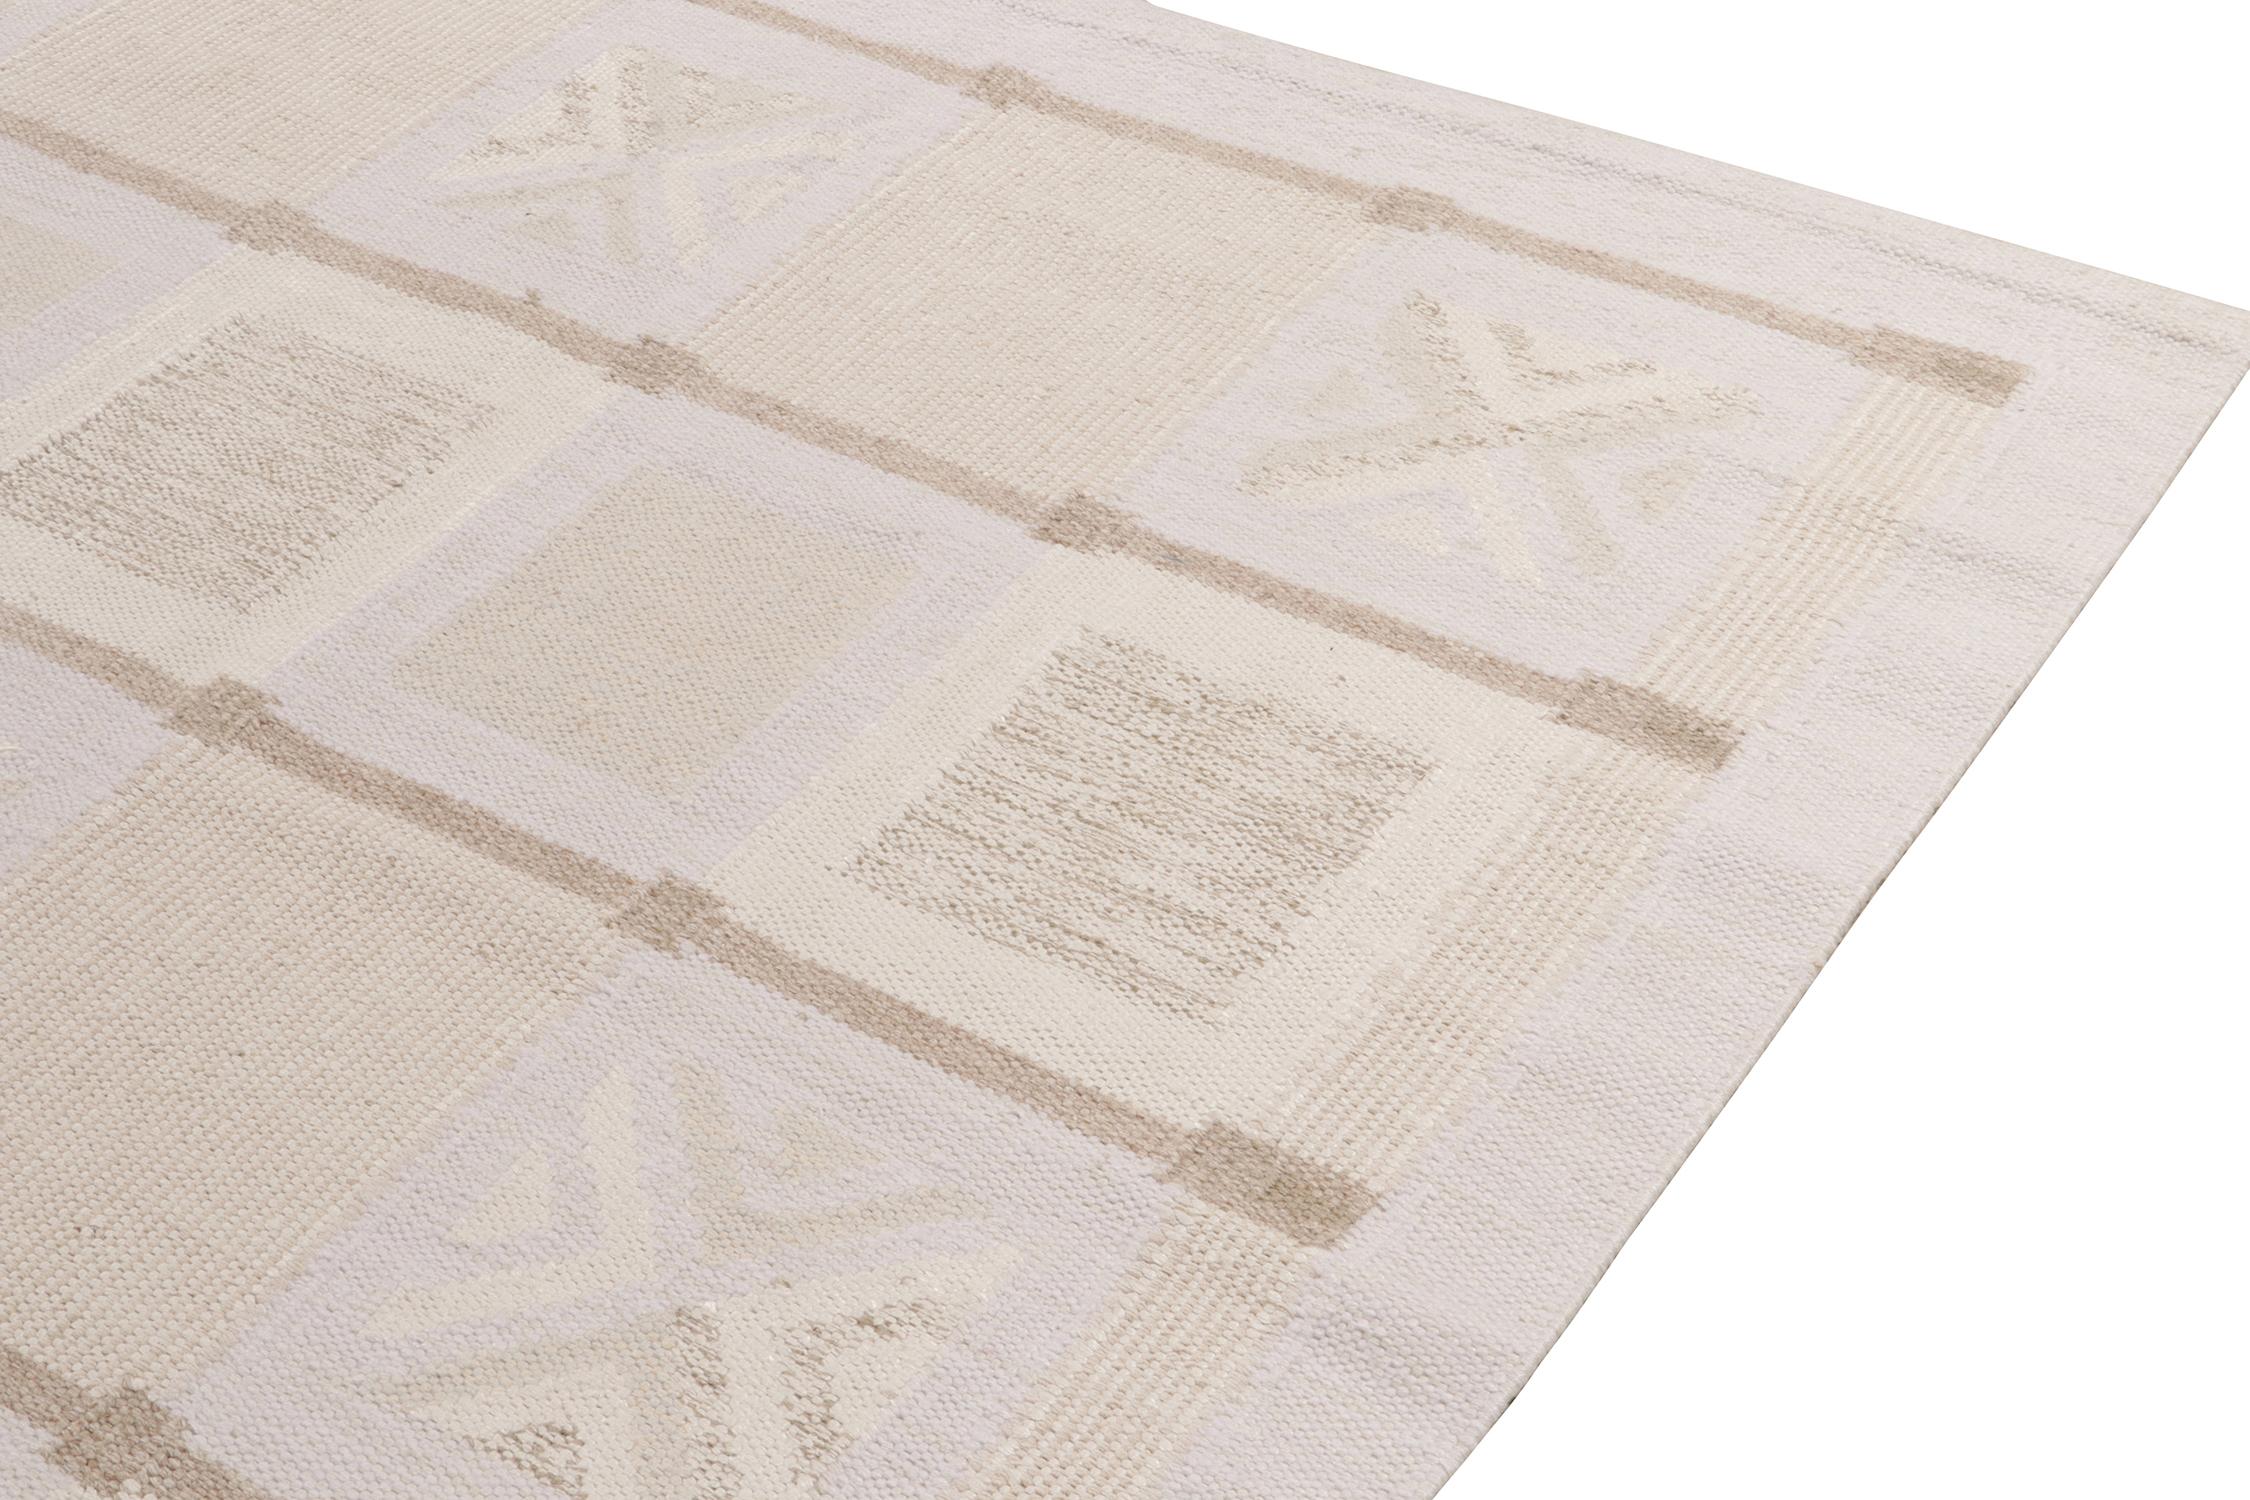 Hand-Knotted Rug & Kilim's Scandinavian Style Kilim in White, Beige-Brown Geometric Pattern For Sale